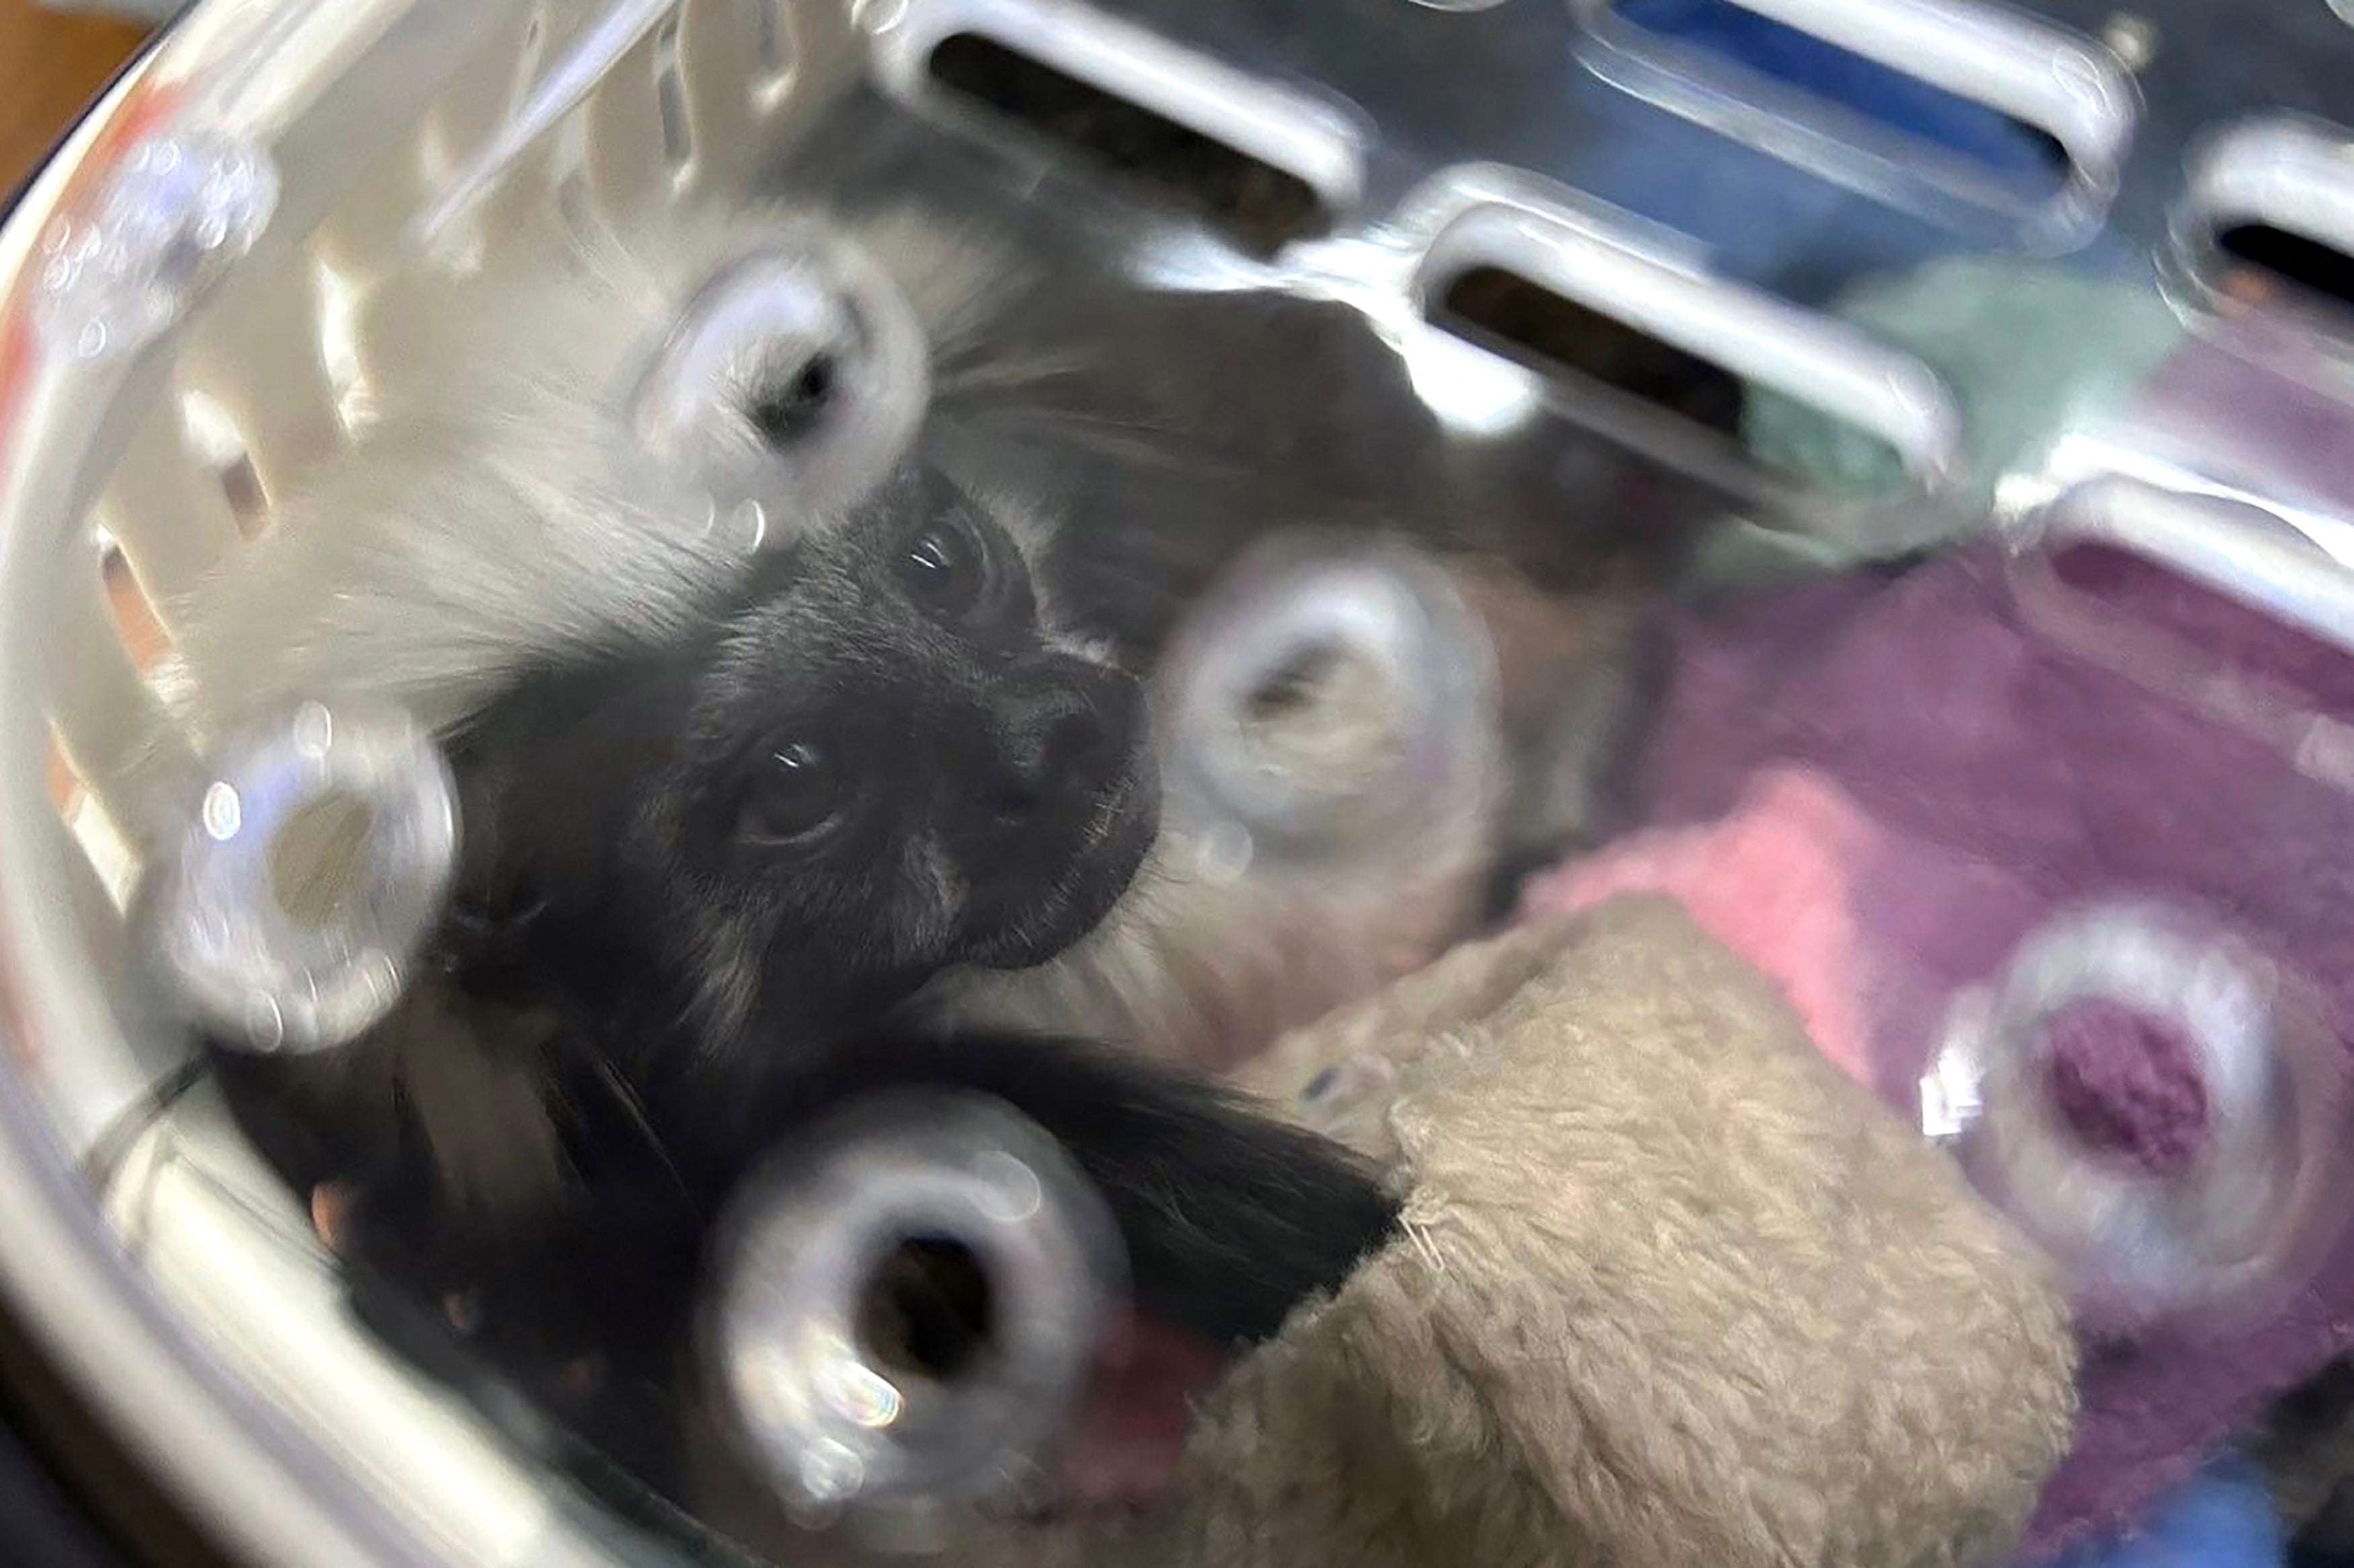 An endangered cotton-top tamarin monkey found in the luggage